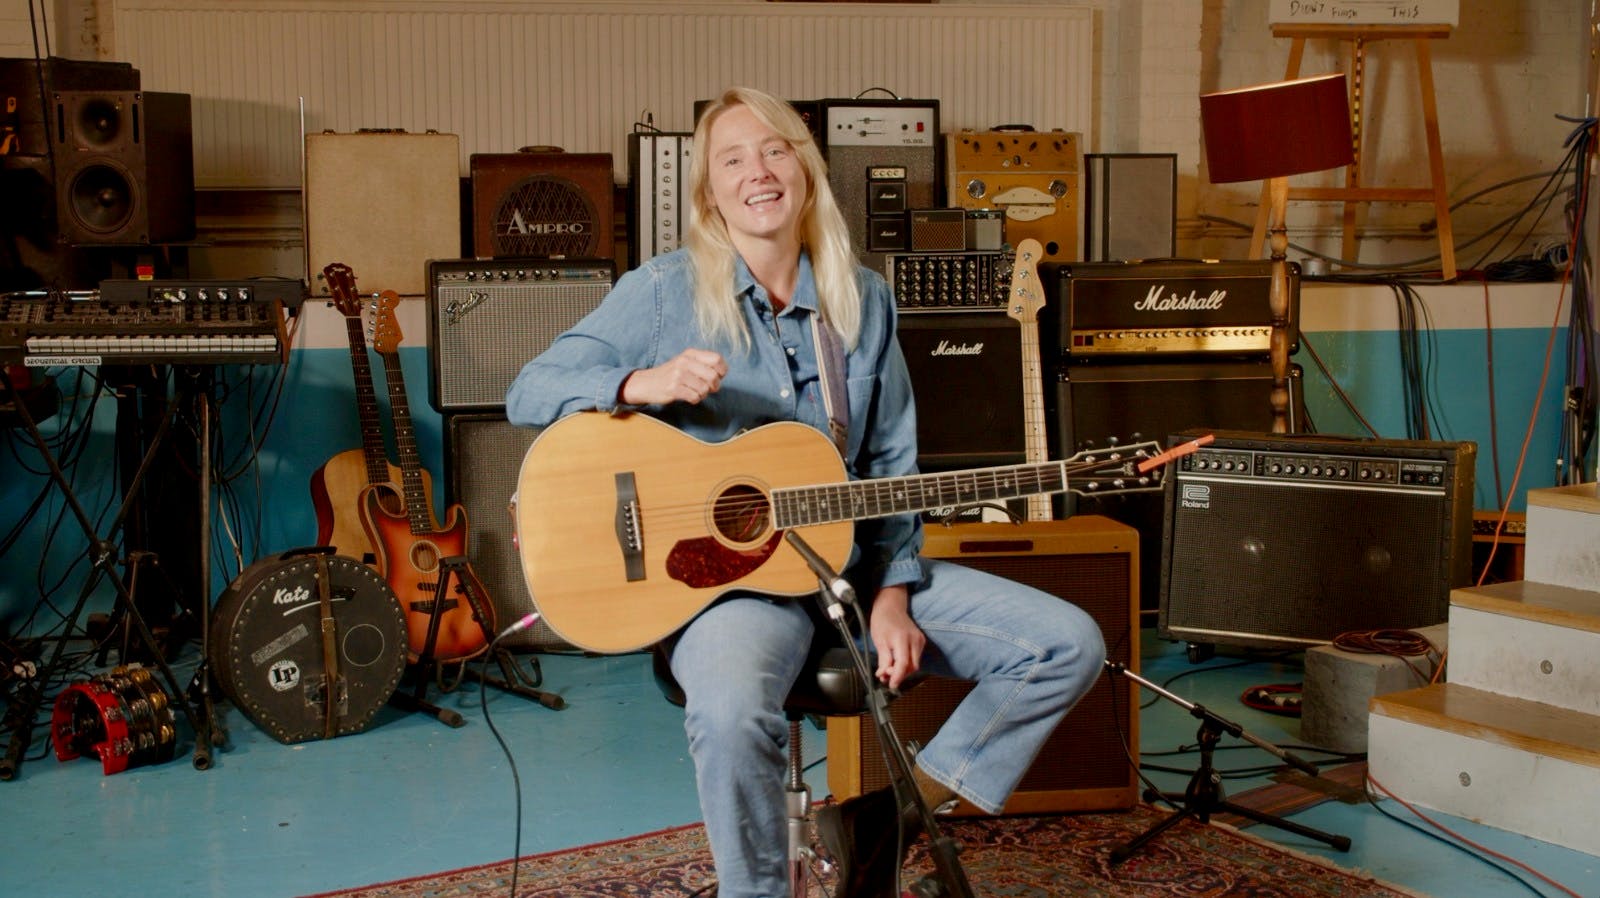 Learn Guitar with Lissie on MusicGurus